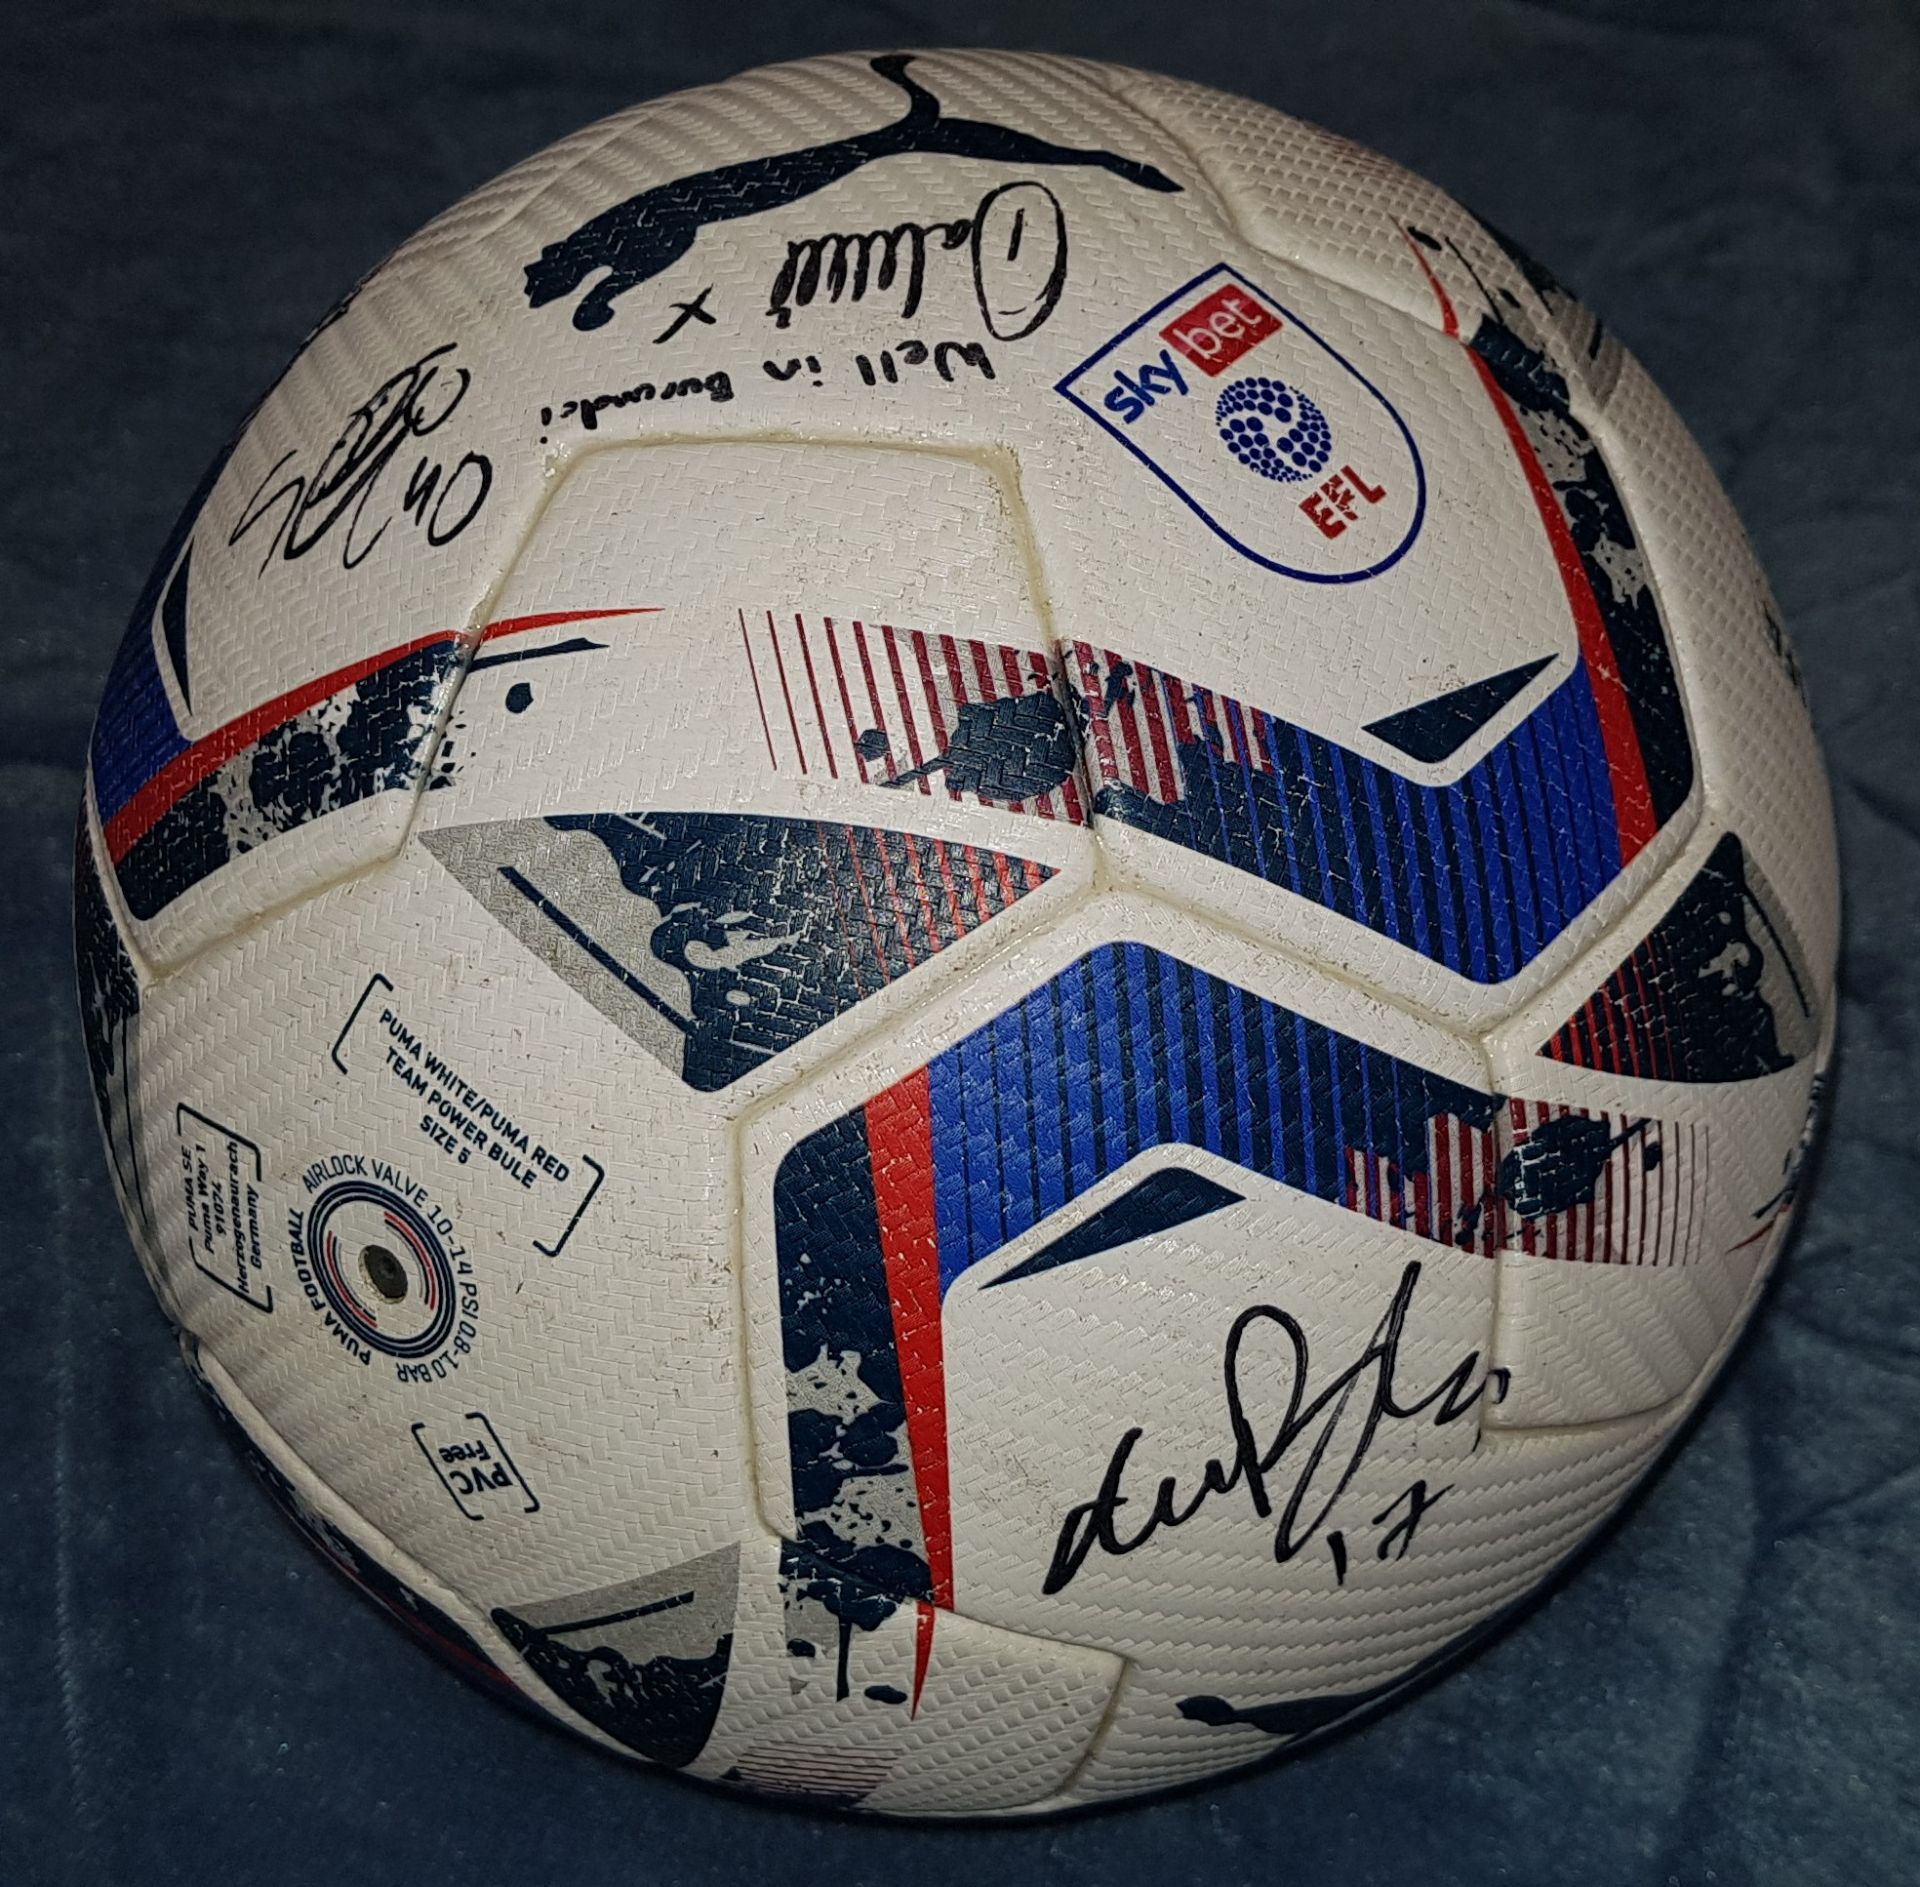 PUMA SIZE 5 FOOTBALL FIFA QUALITY PRO SKYBET EFL WITH NUMEROUS UNKNOWN SIGNATURES (SEE IMAGES)